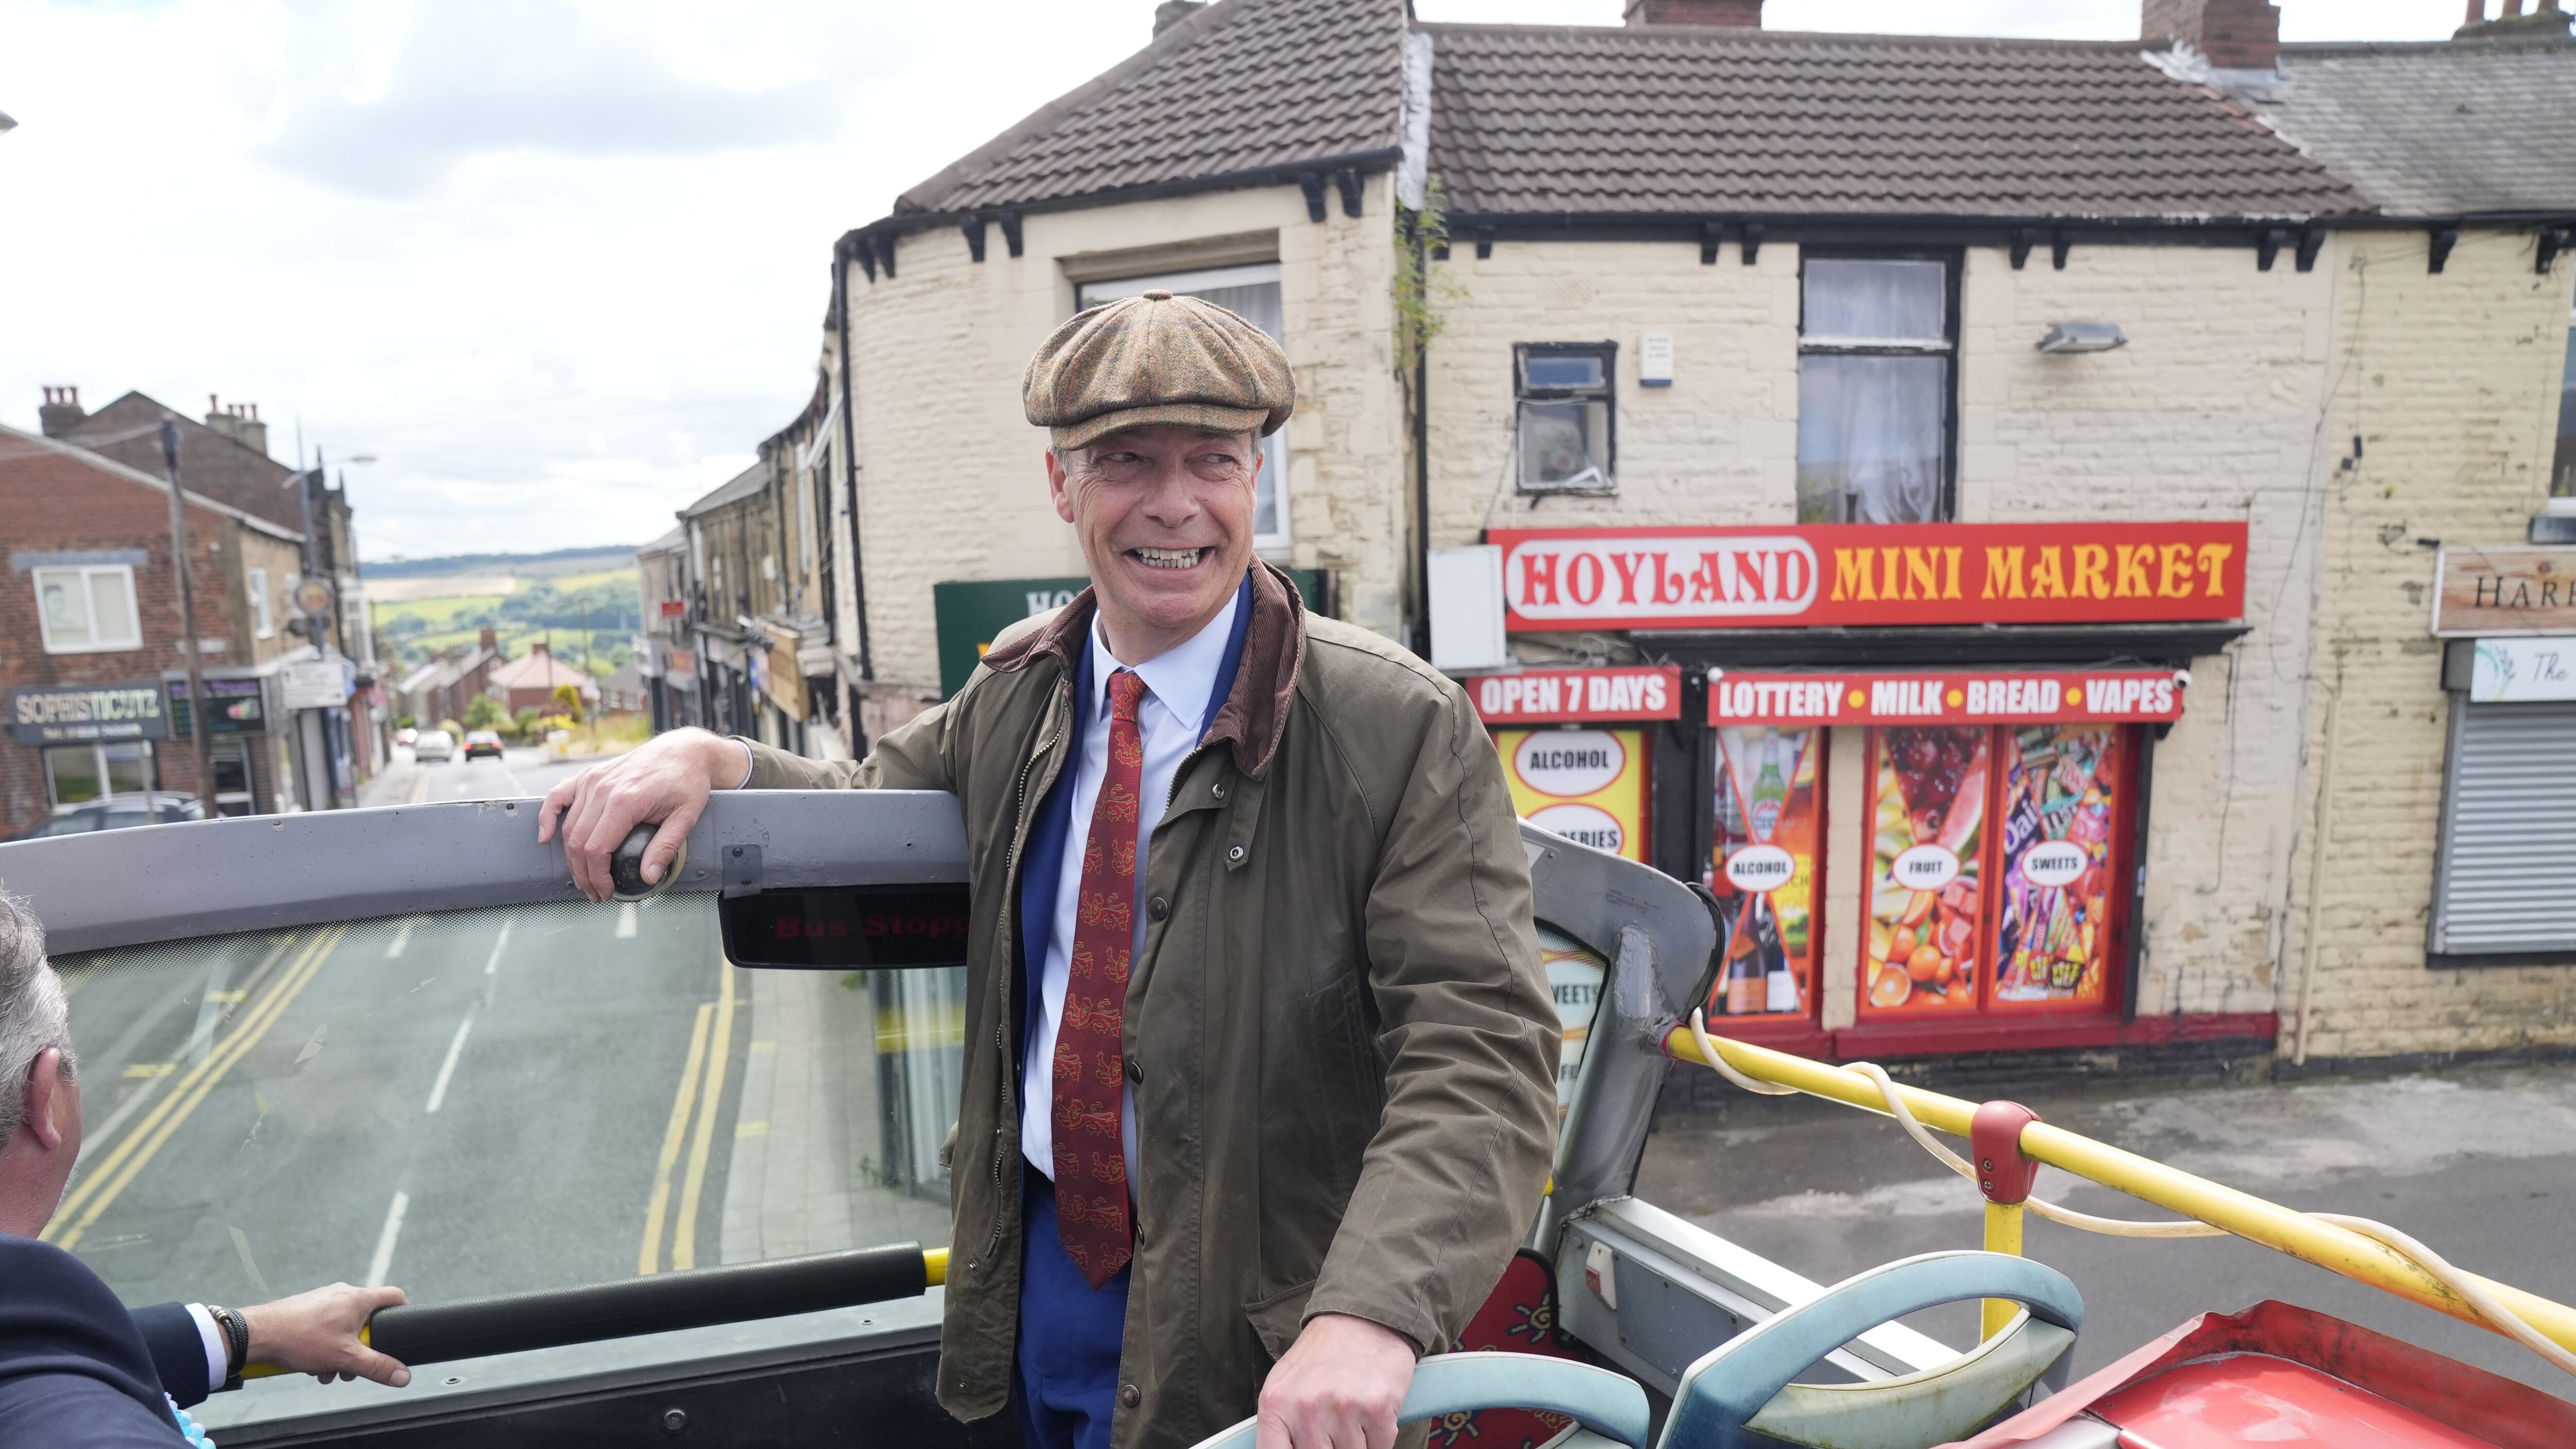 Reform UK leader Nigel Farage has been on the campaign trail